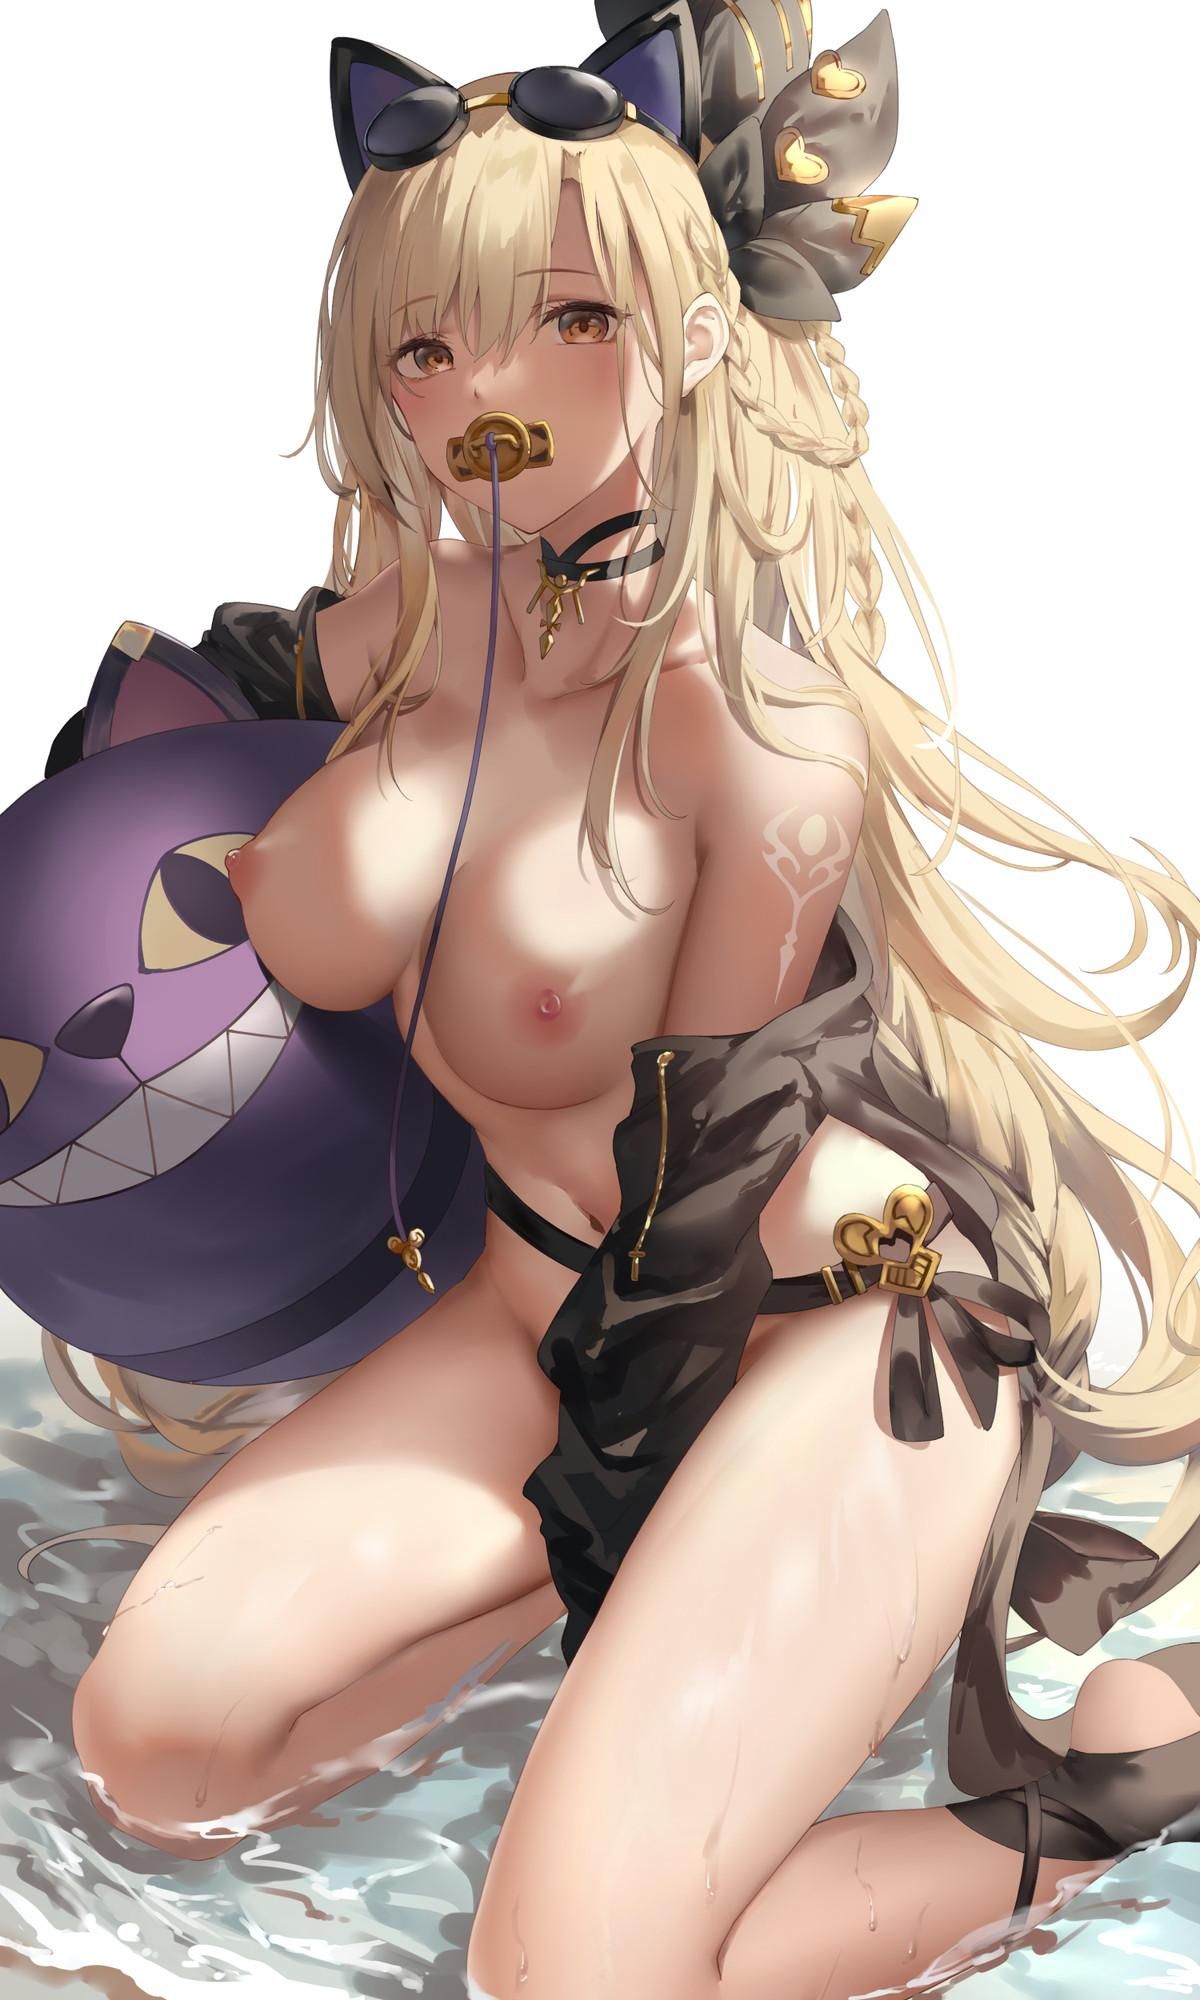 I wanted to pull it out with an erotic image of Gran Blue fantasy, so I will paste it 19